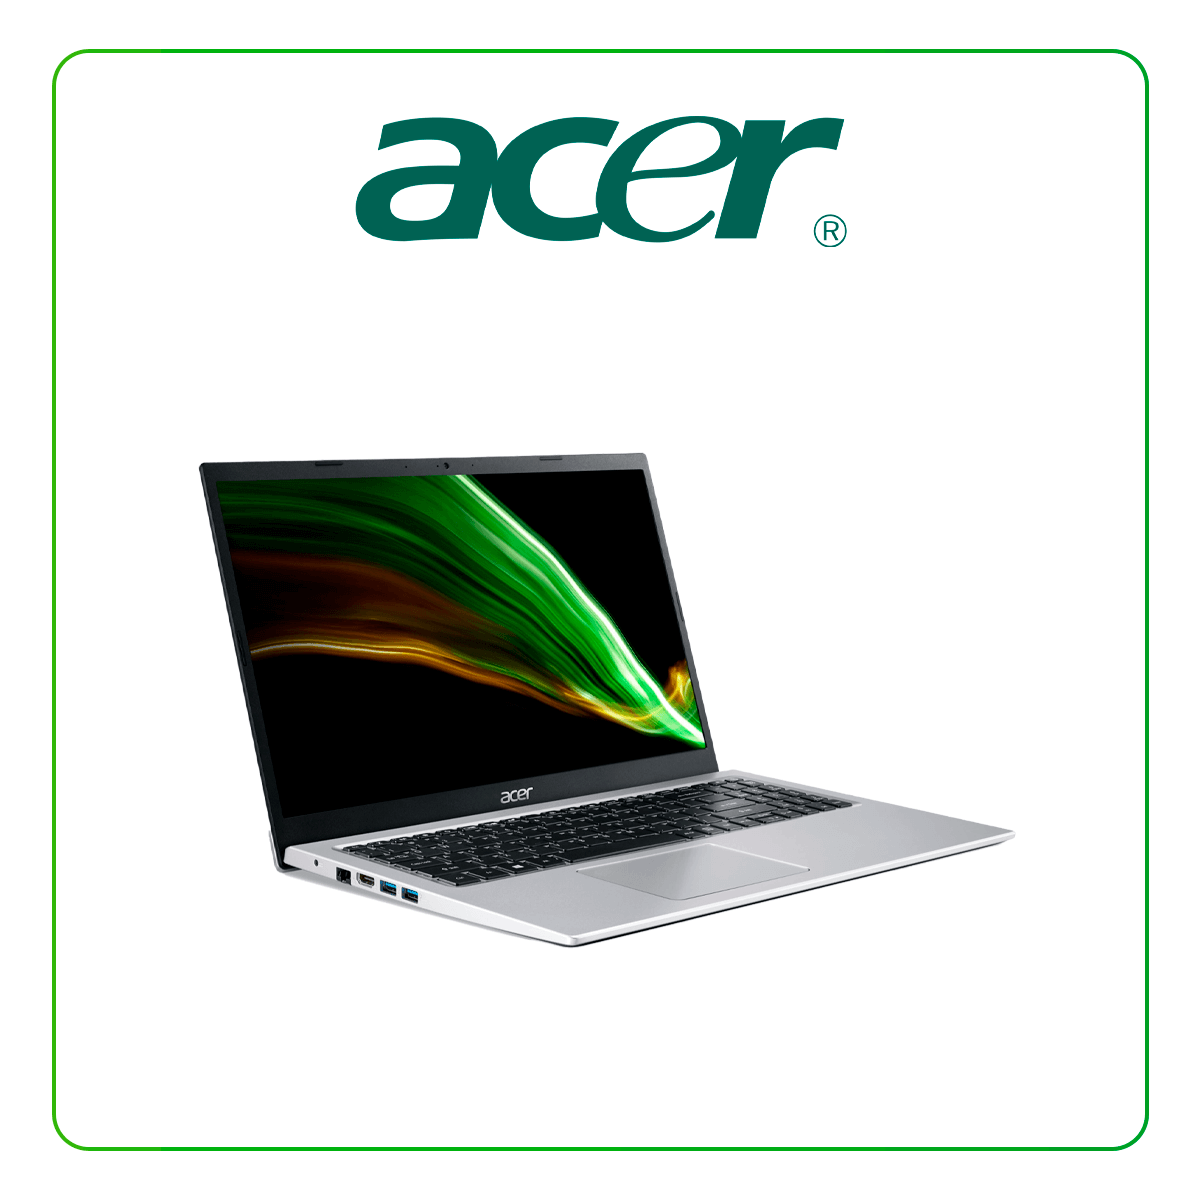 acer A315-58-569T